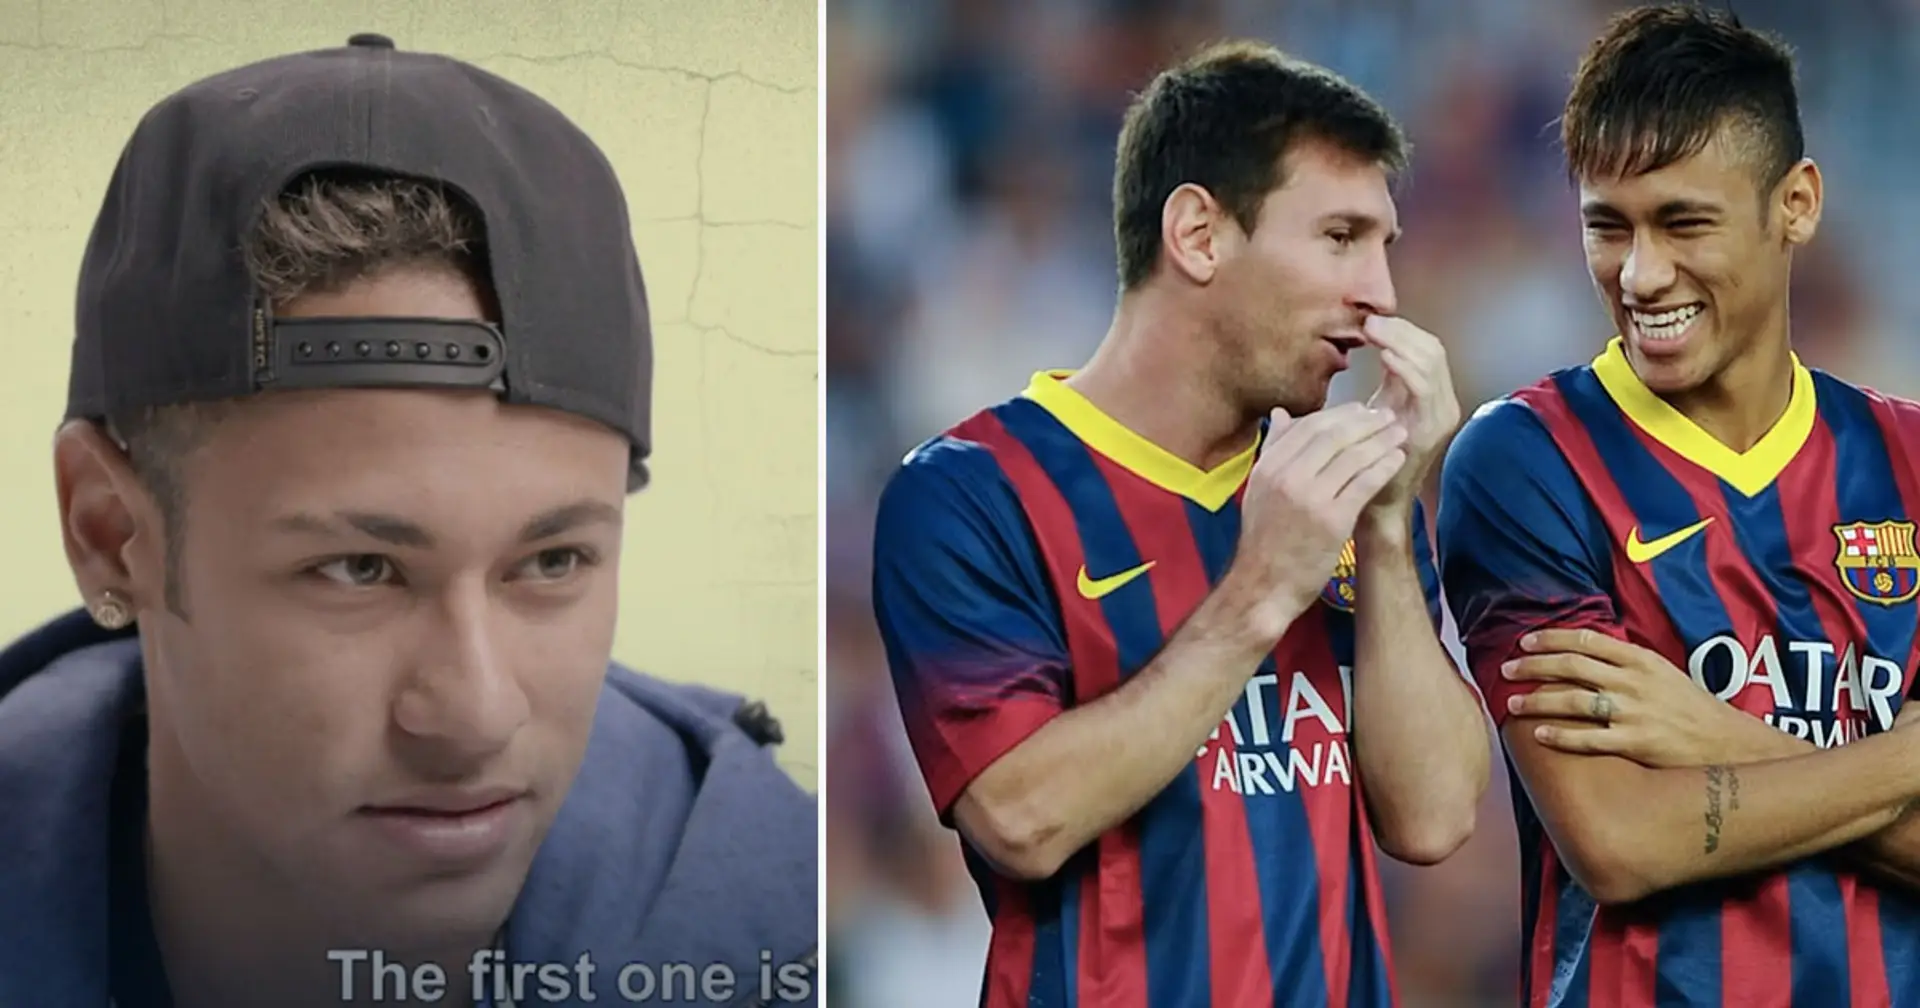 Neymar reveals 5 funniest Barca players - Messi makes the cut